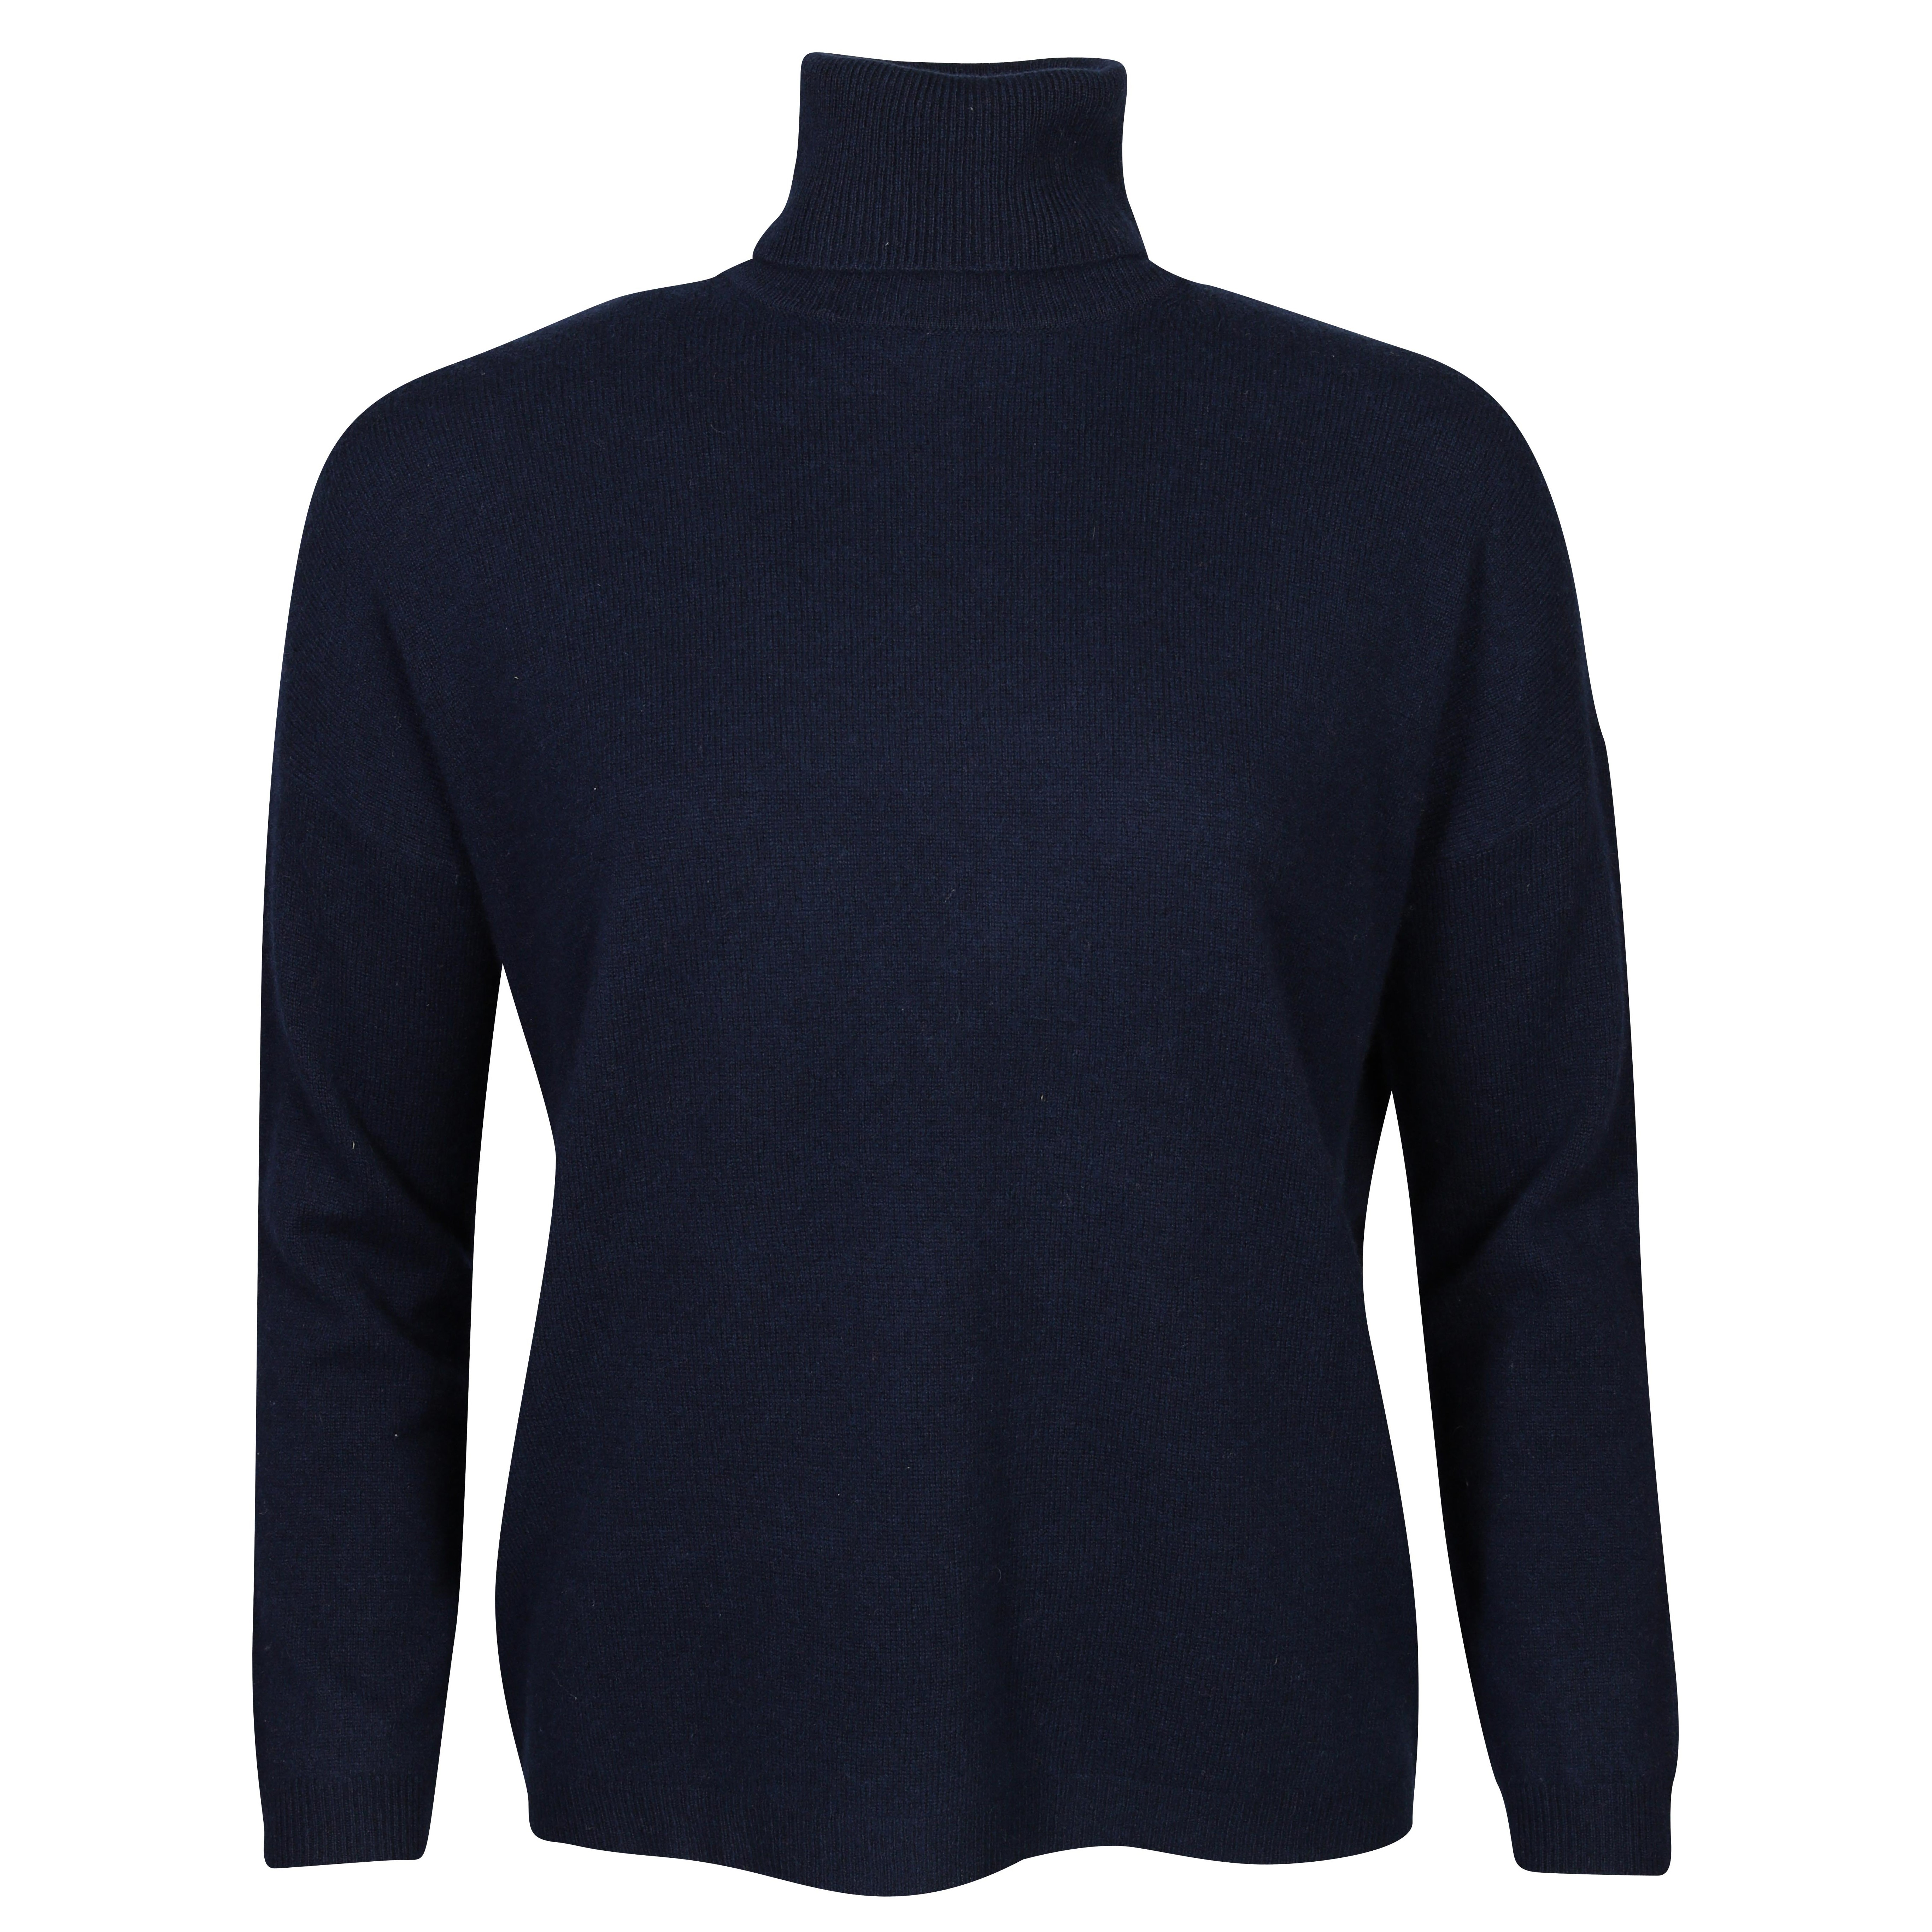 Absolut Cashmere Ambre Turtle Neck in Nuit